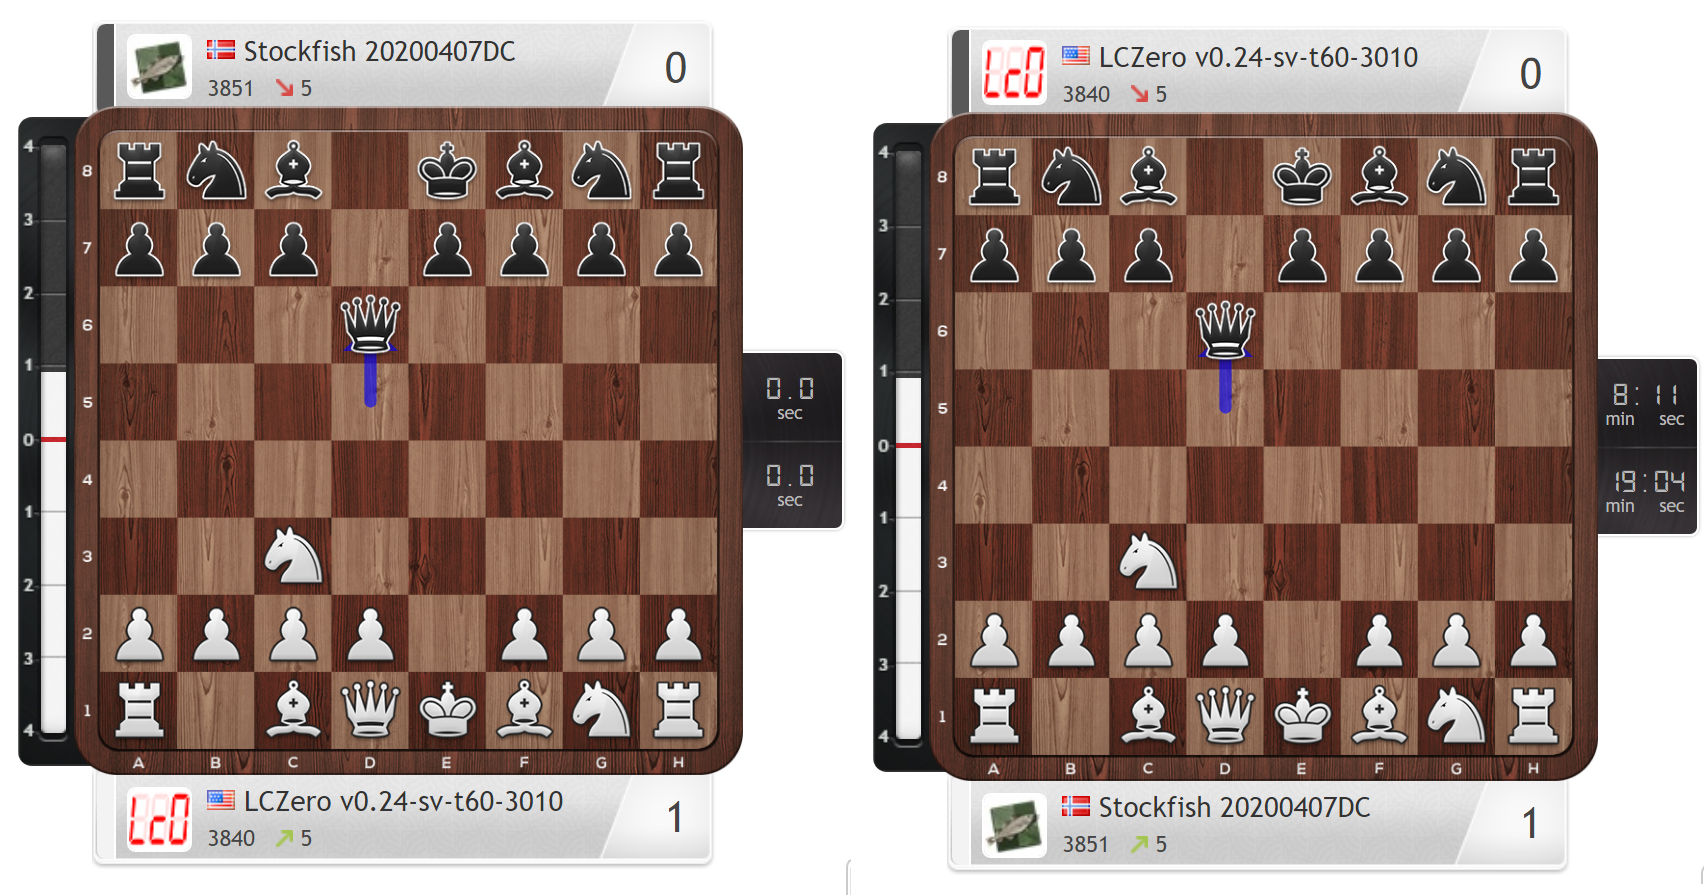 agadmator on X: Well, so much for the Qd6 Scandinavian. Leela crushed  Stockfish with white and Stockfish crushed Leela with white. Unless # AlphaZero has something to chip in for black, time to